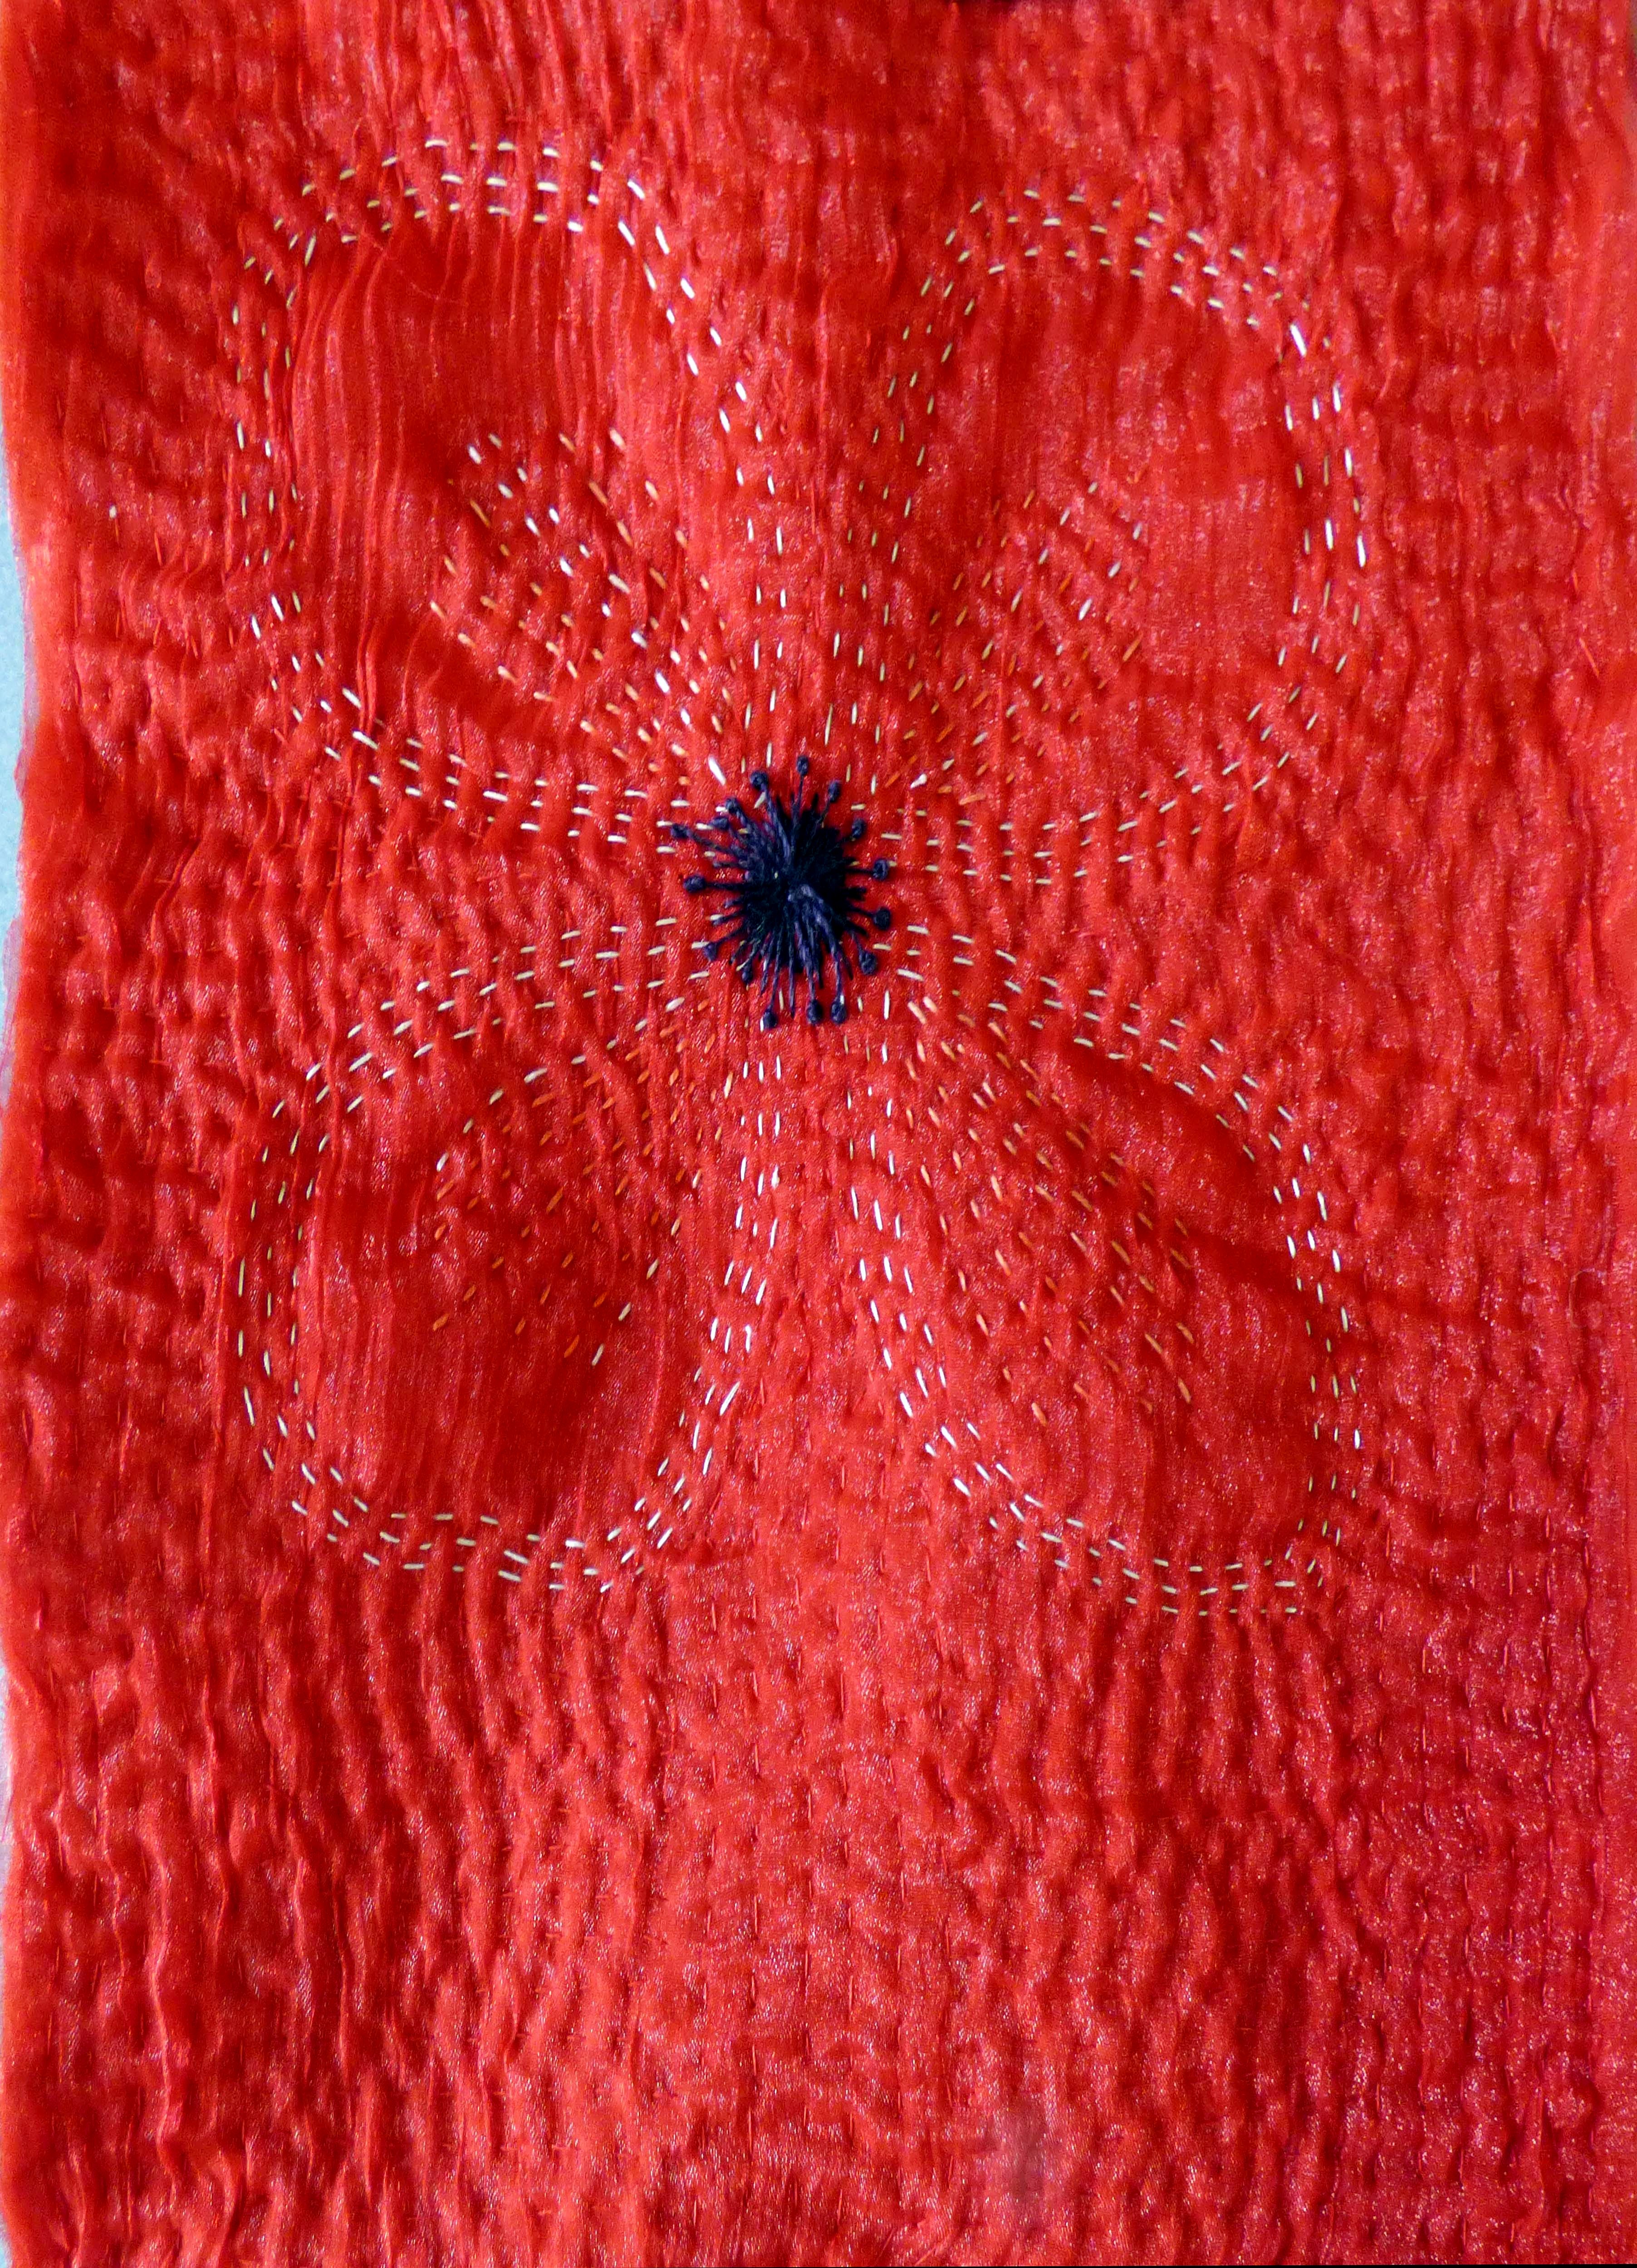 sample by Gill Roberts at Layers, Texturing and Stitch workshop 2022